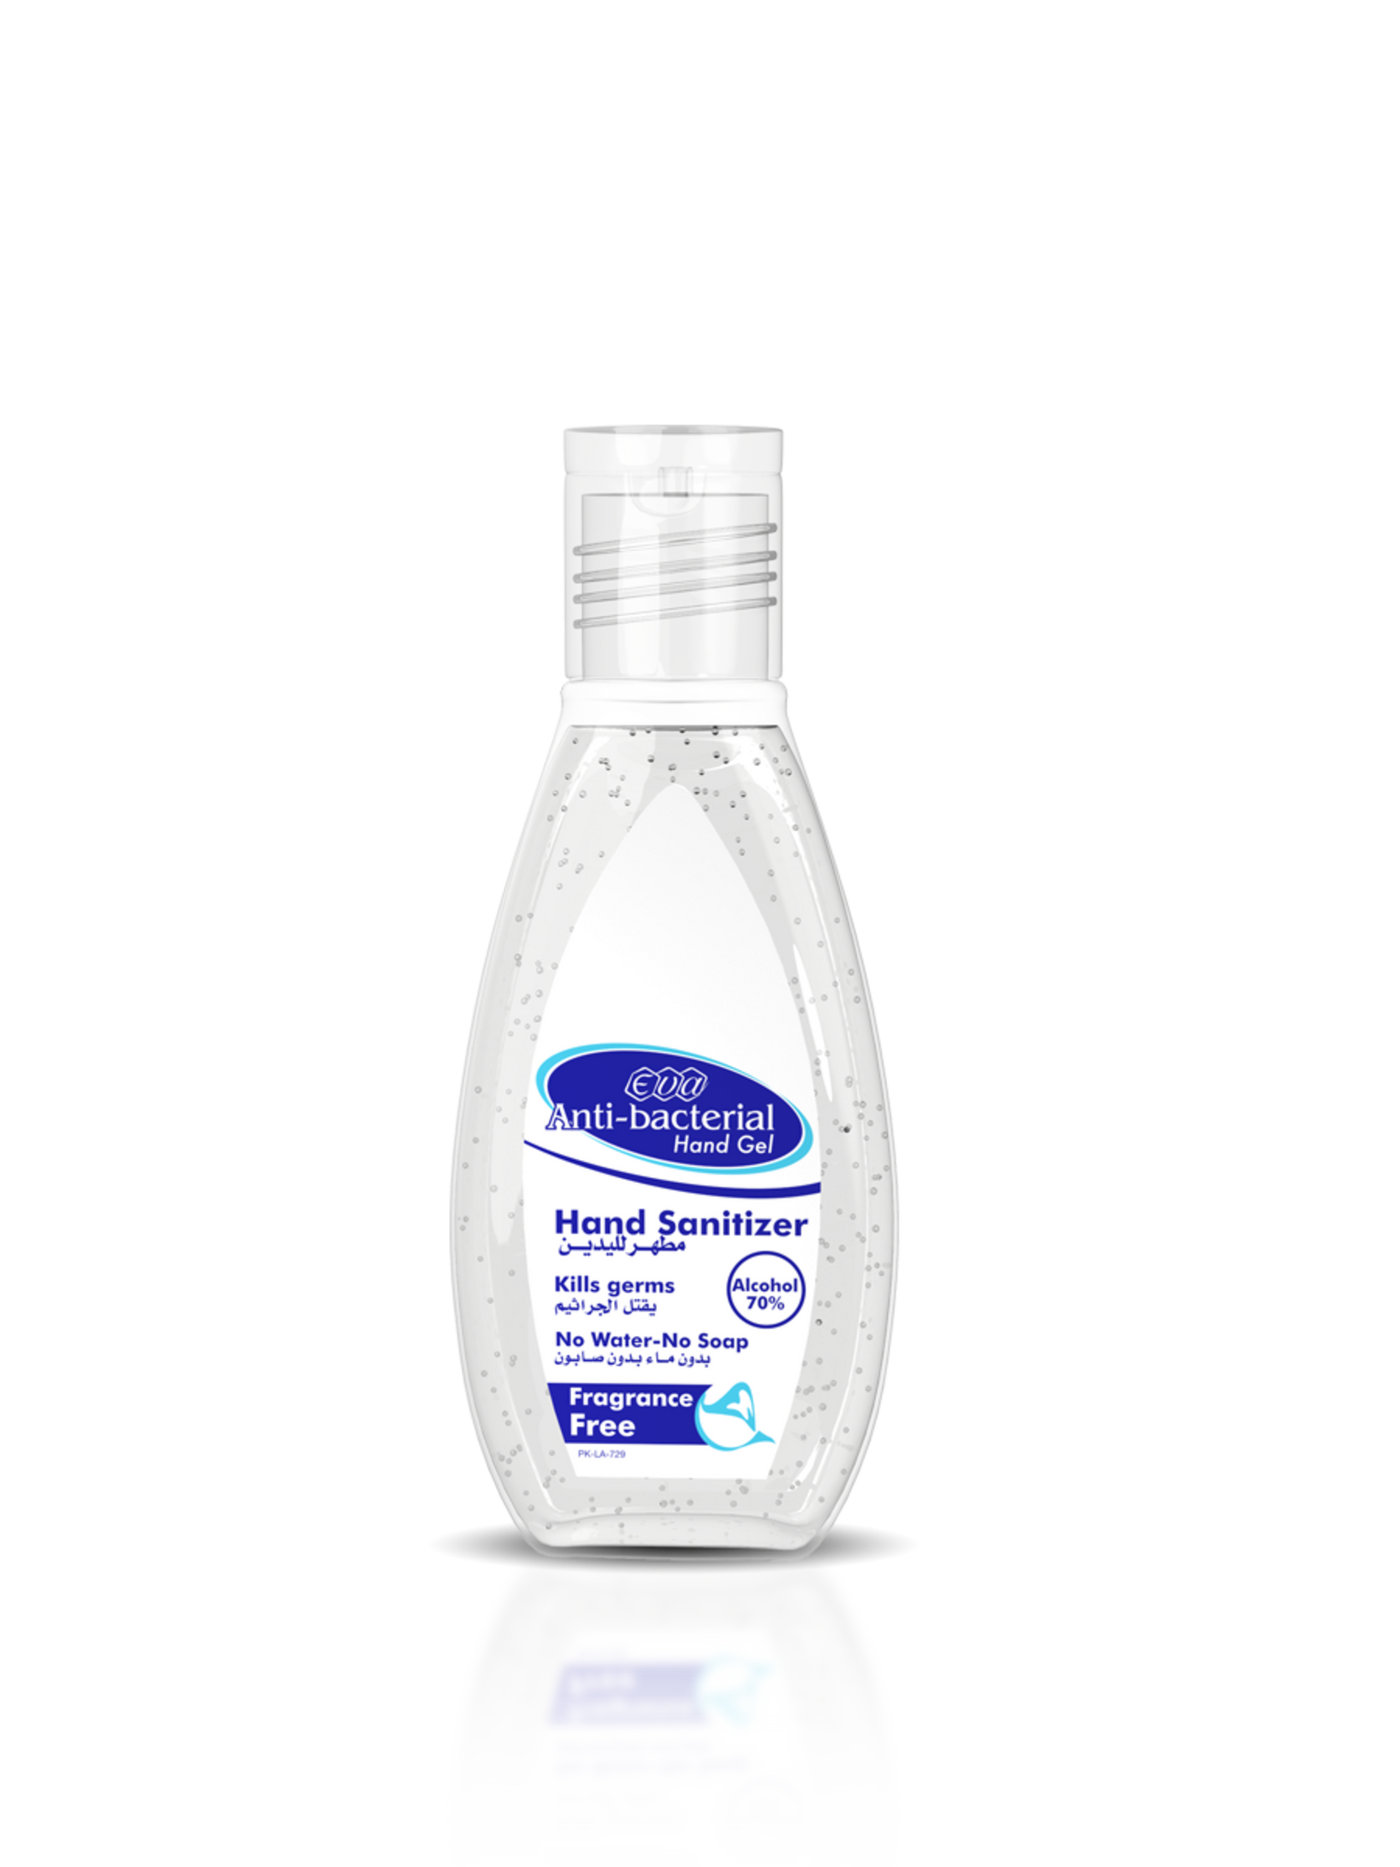 Anti-bacterial Hand Sanitizer - 50ml - Alcohol 70%